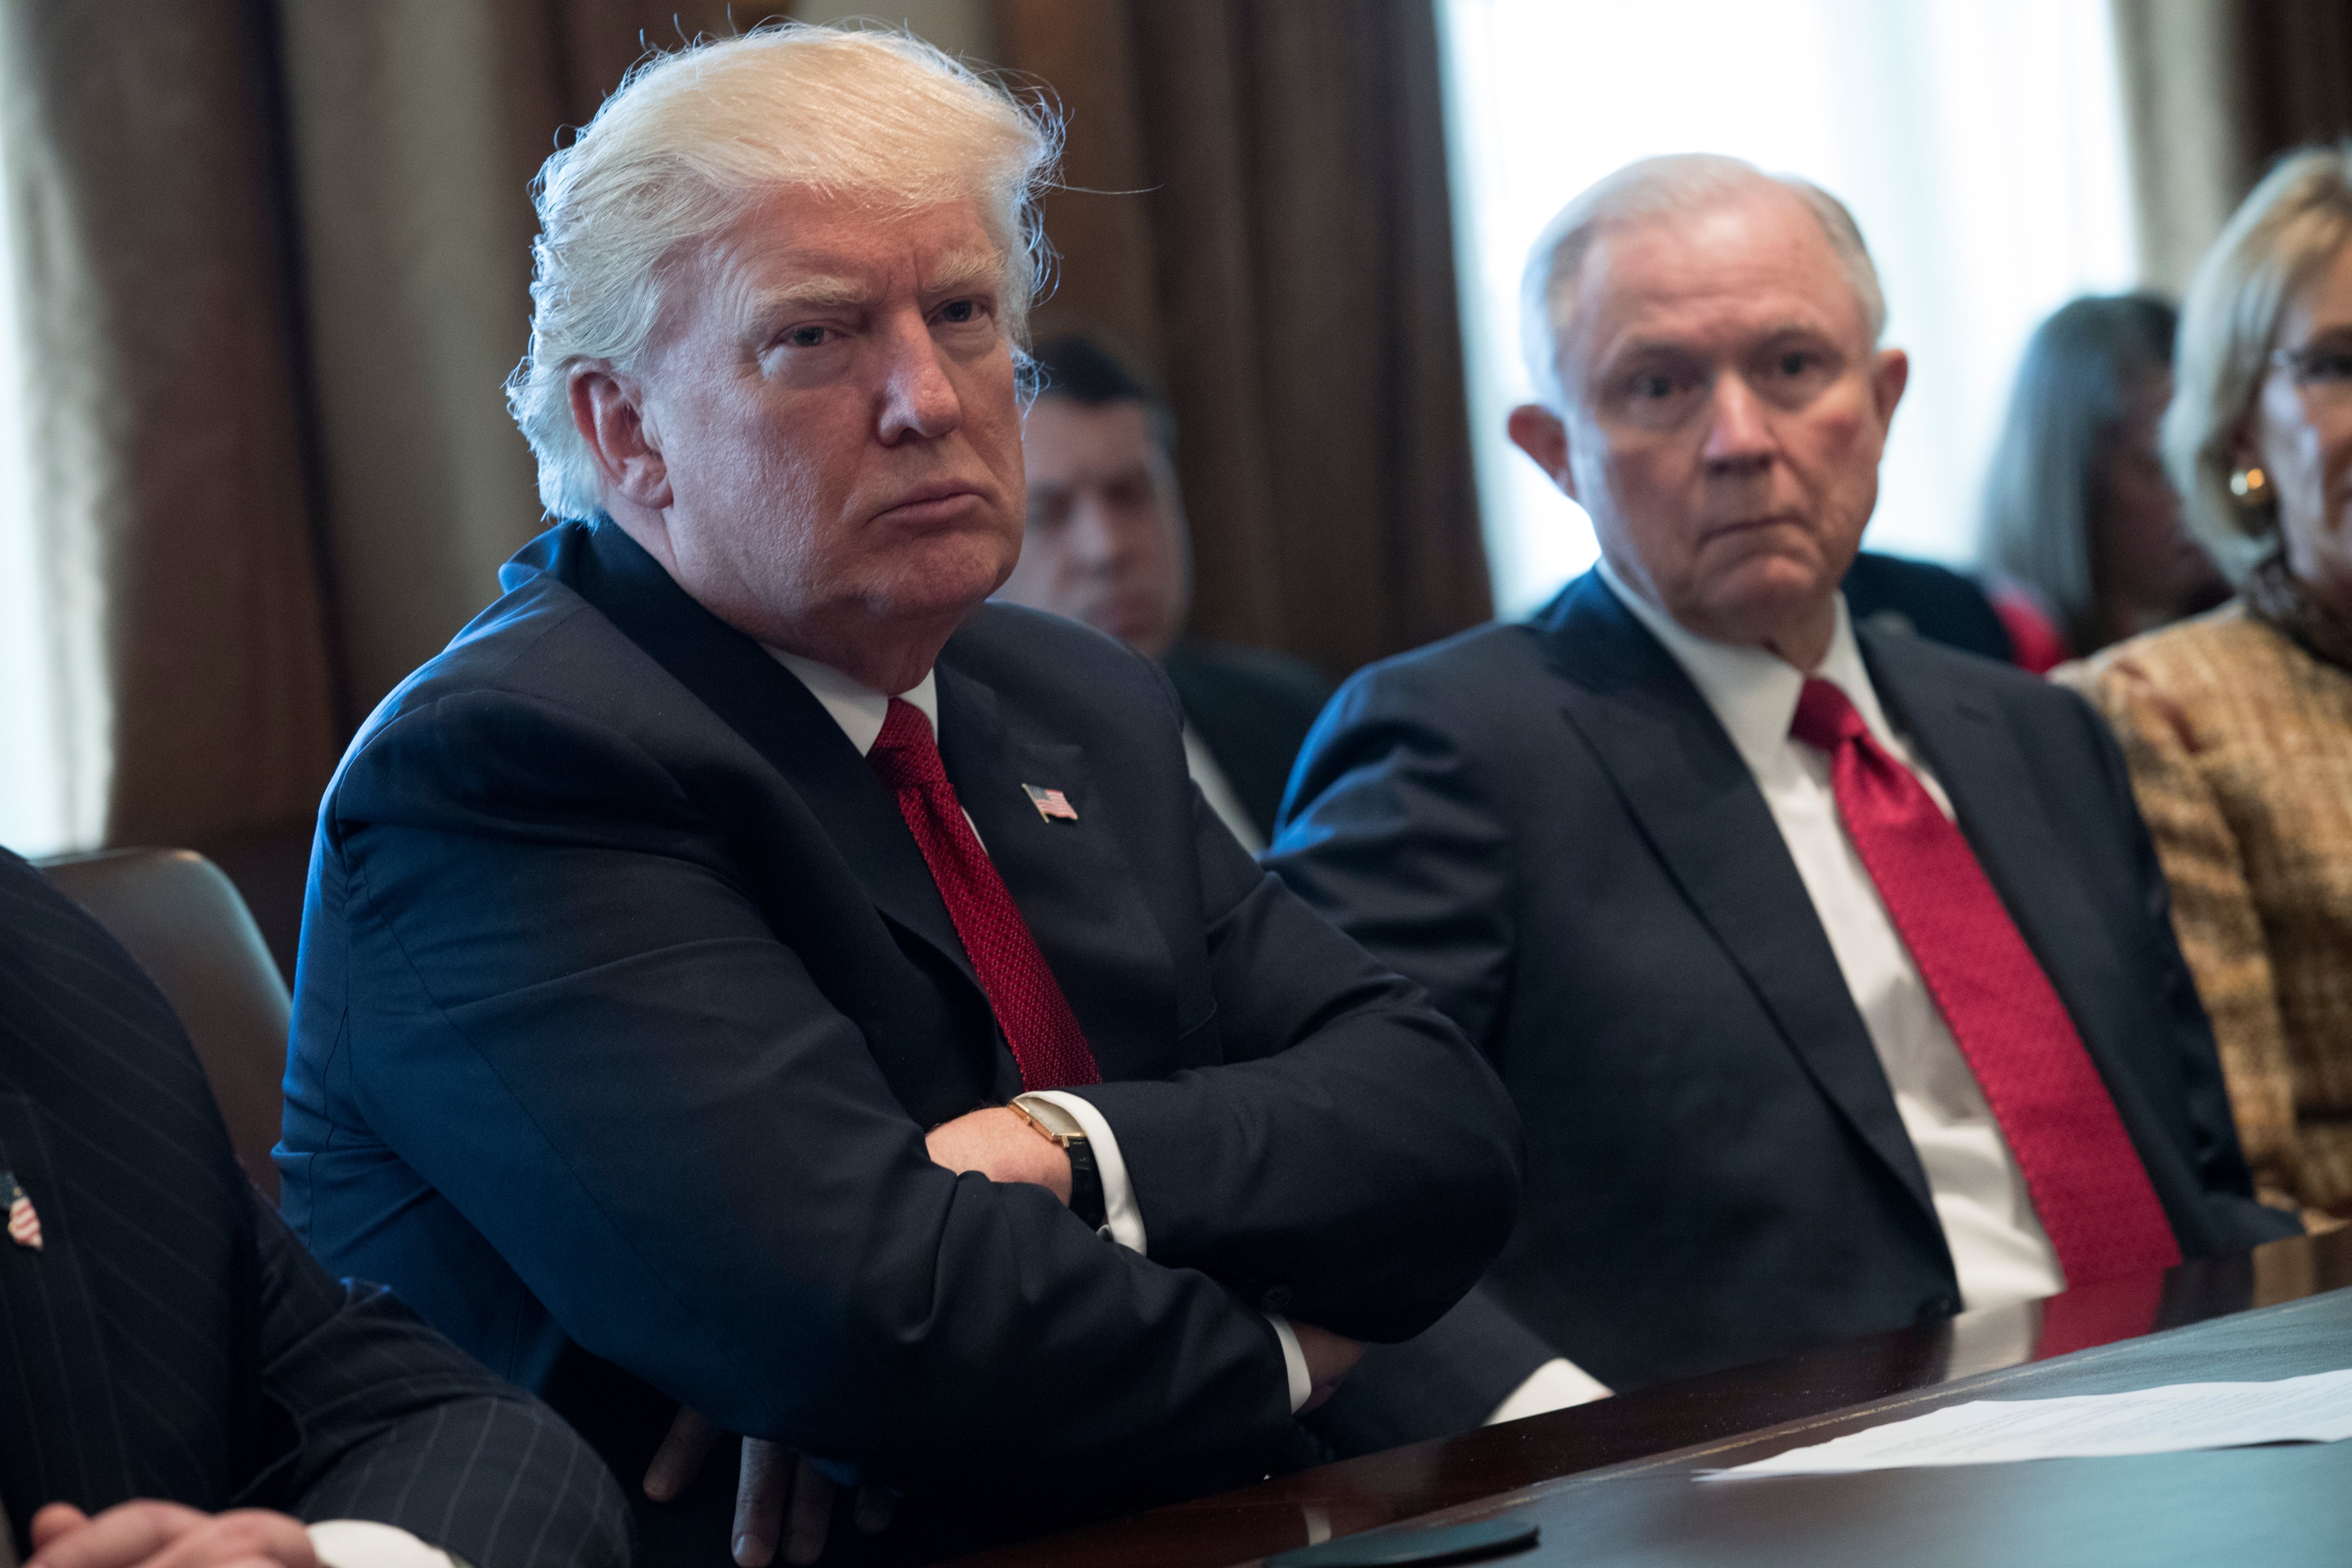 U.S. President Donald Trump (L) and Attorney General Jeff Sessions (R) attend a panel discussion on an opioid and drug abuse in the Roosevelt Room of the White House March 29, 2017 in Washington, DC. (Photo by Shawn Thew-Pool/Getty Images) (Pool&mdash;Getty Images)